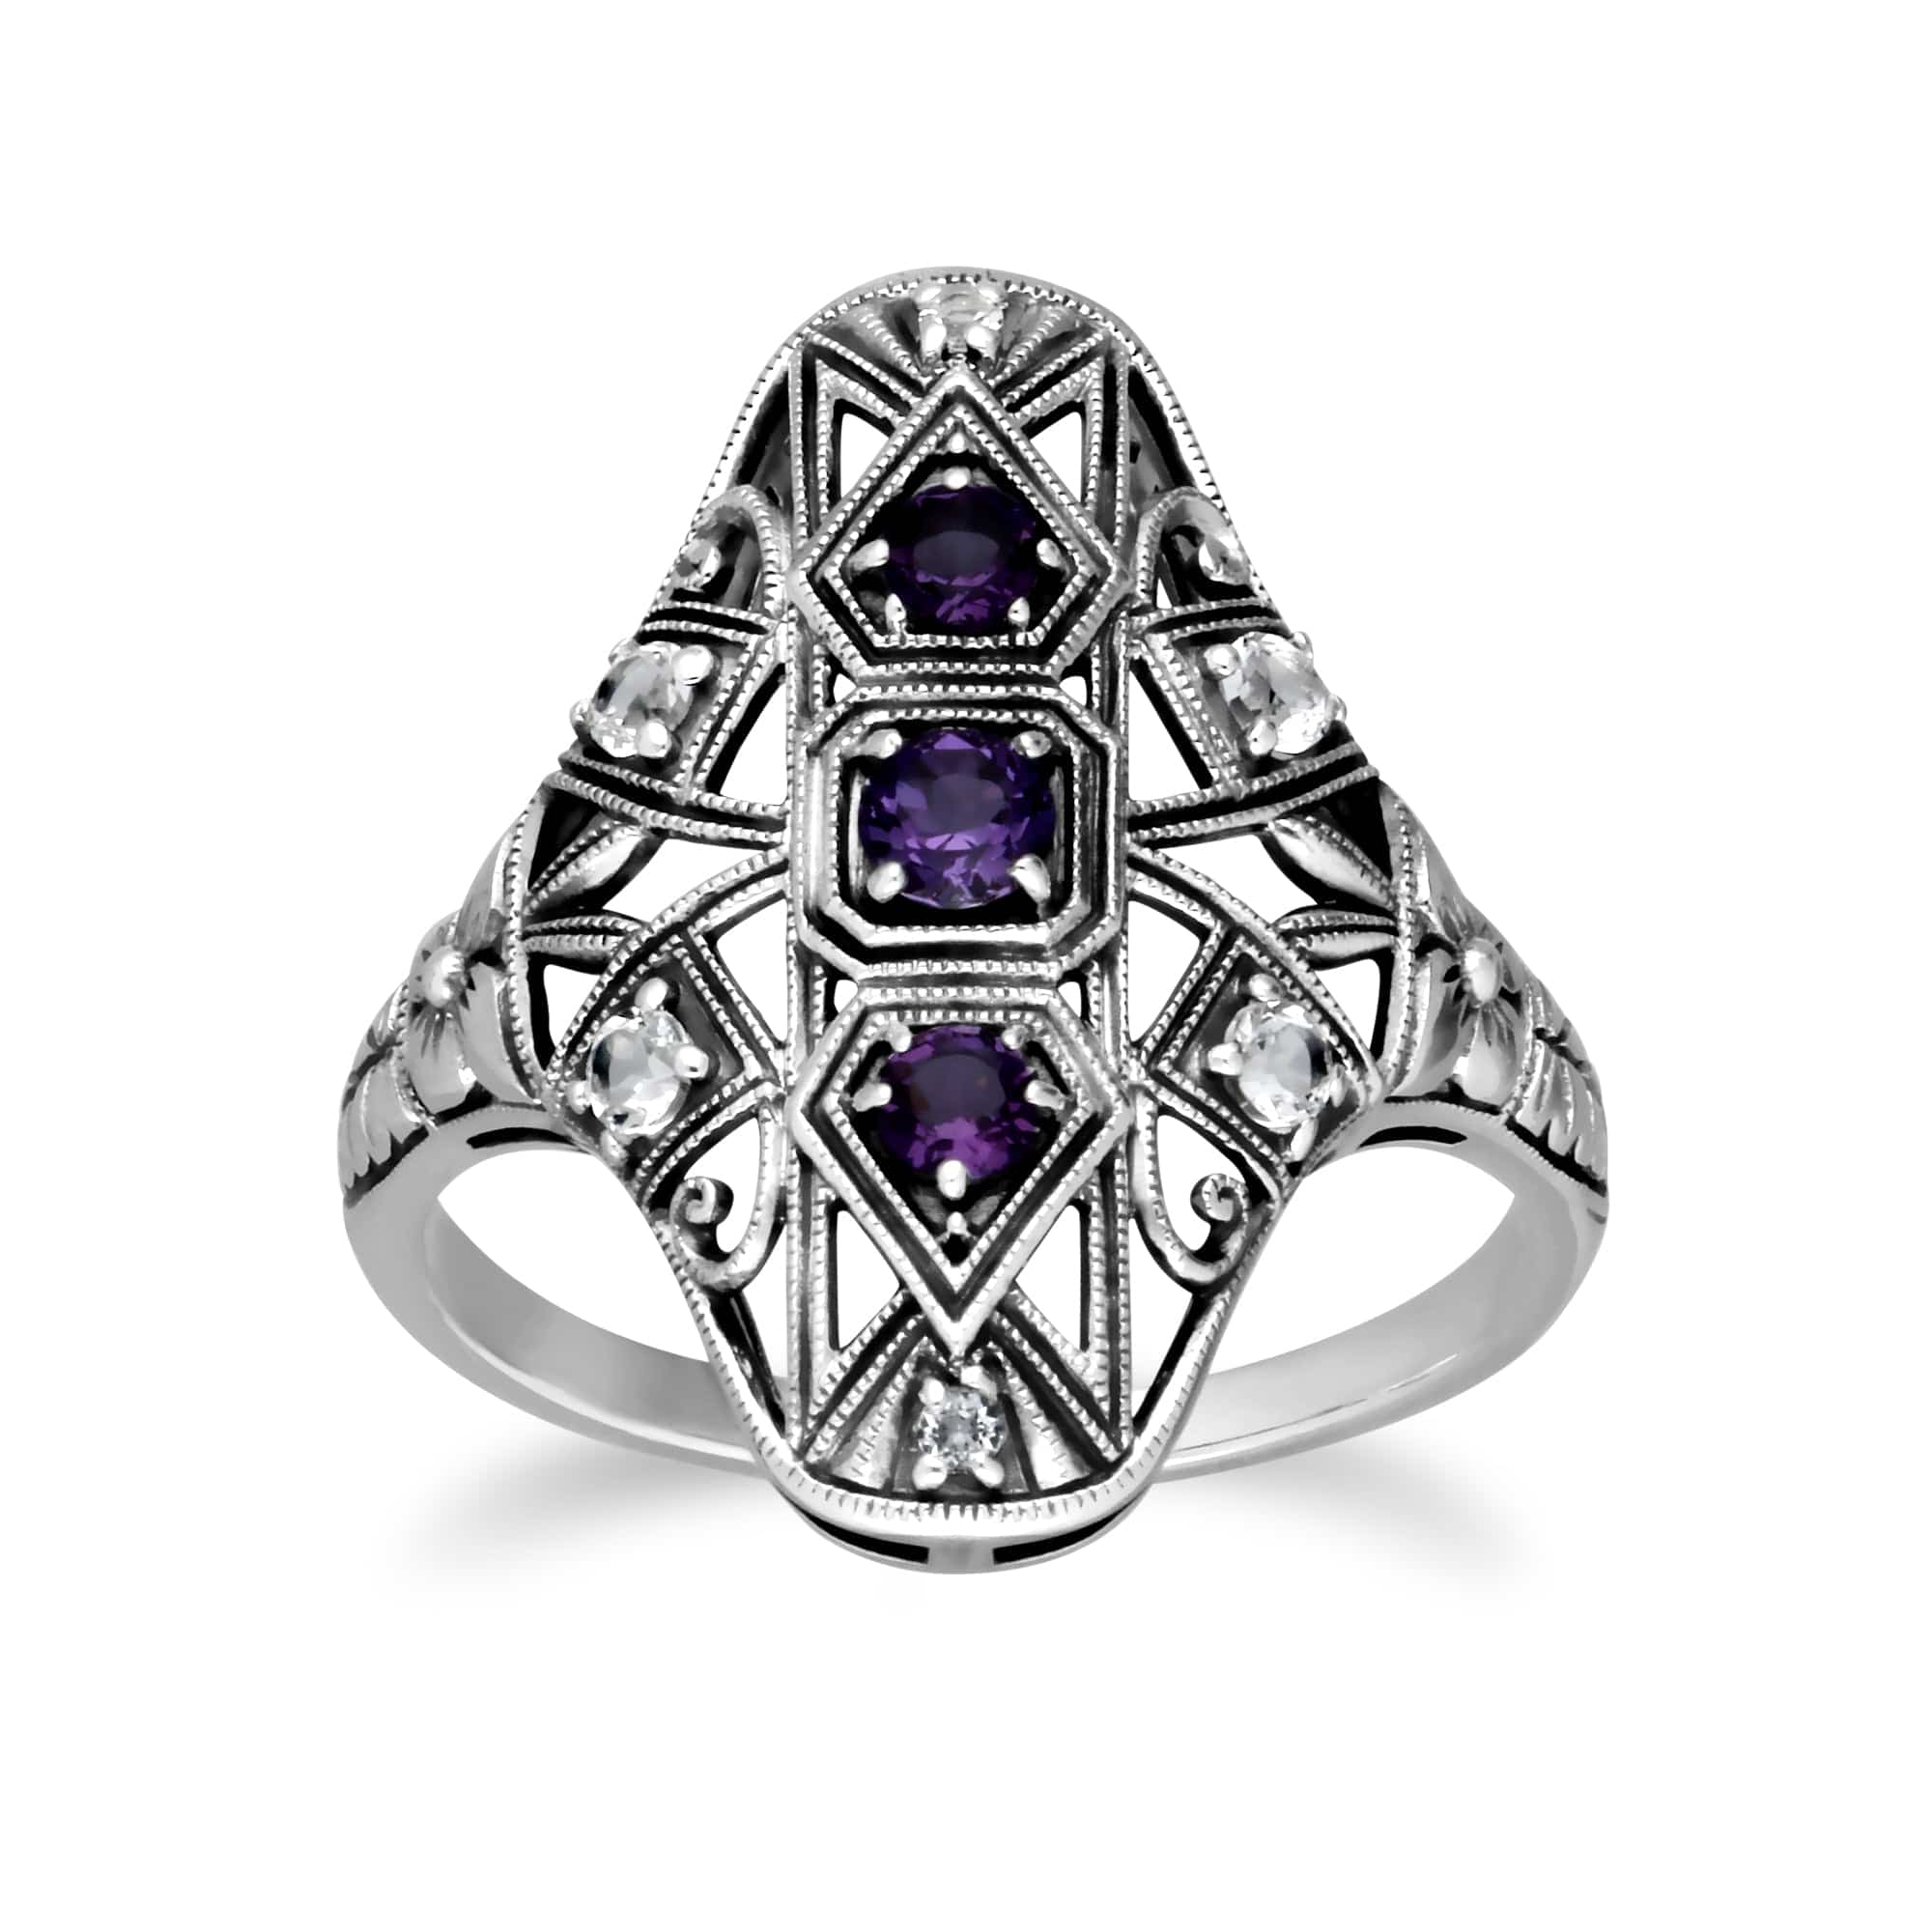 241R210602925 Art Nouveau Style Round Amethyst & White Topaz Statement Ring in 925 Sterling Silver 1